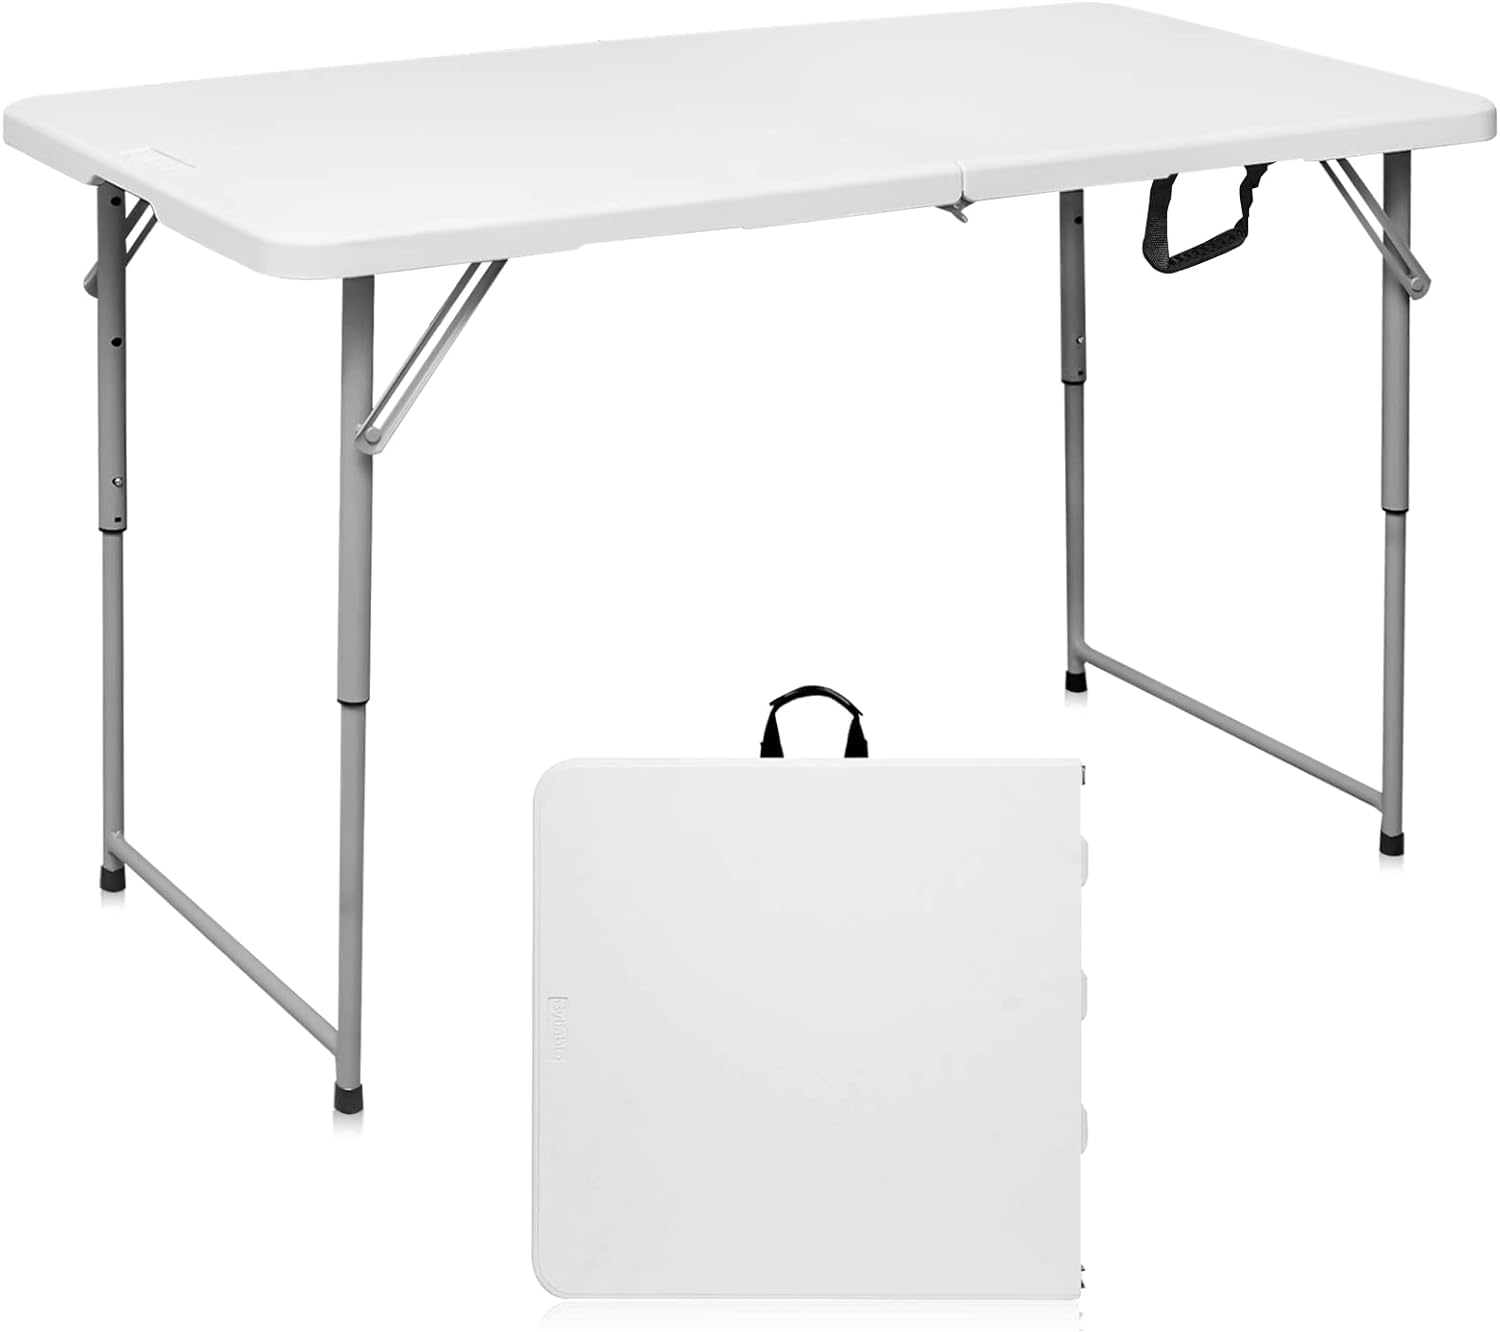 Byliable Folding Table 4 Foot Portable Heavy Duty Plastic Fold-in-Half Utility Foldable Table